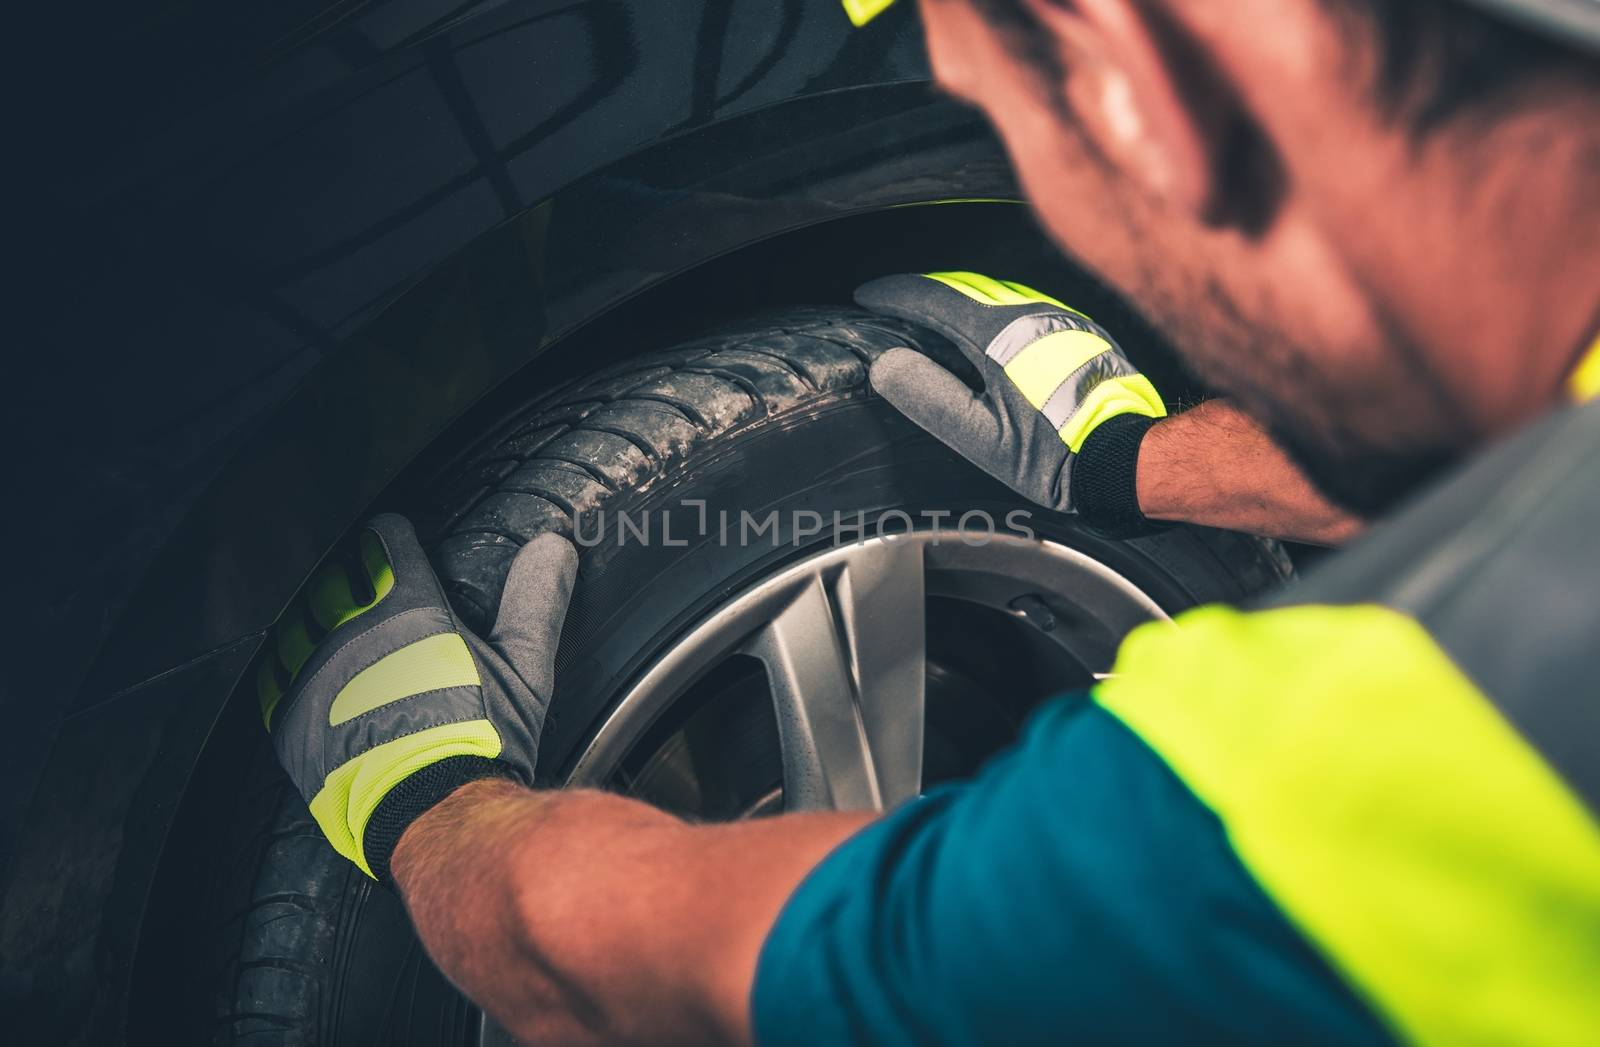 Tire and Wheel Service by welcomia